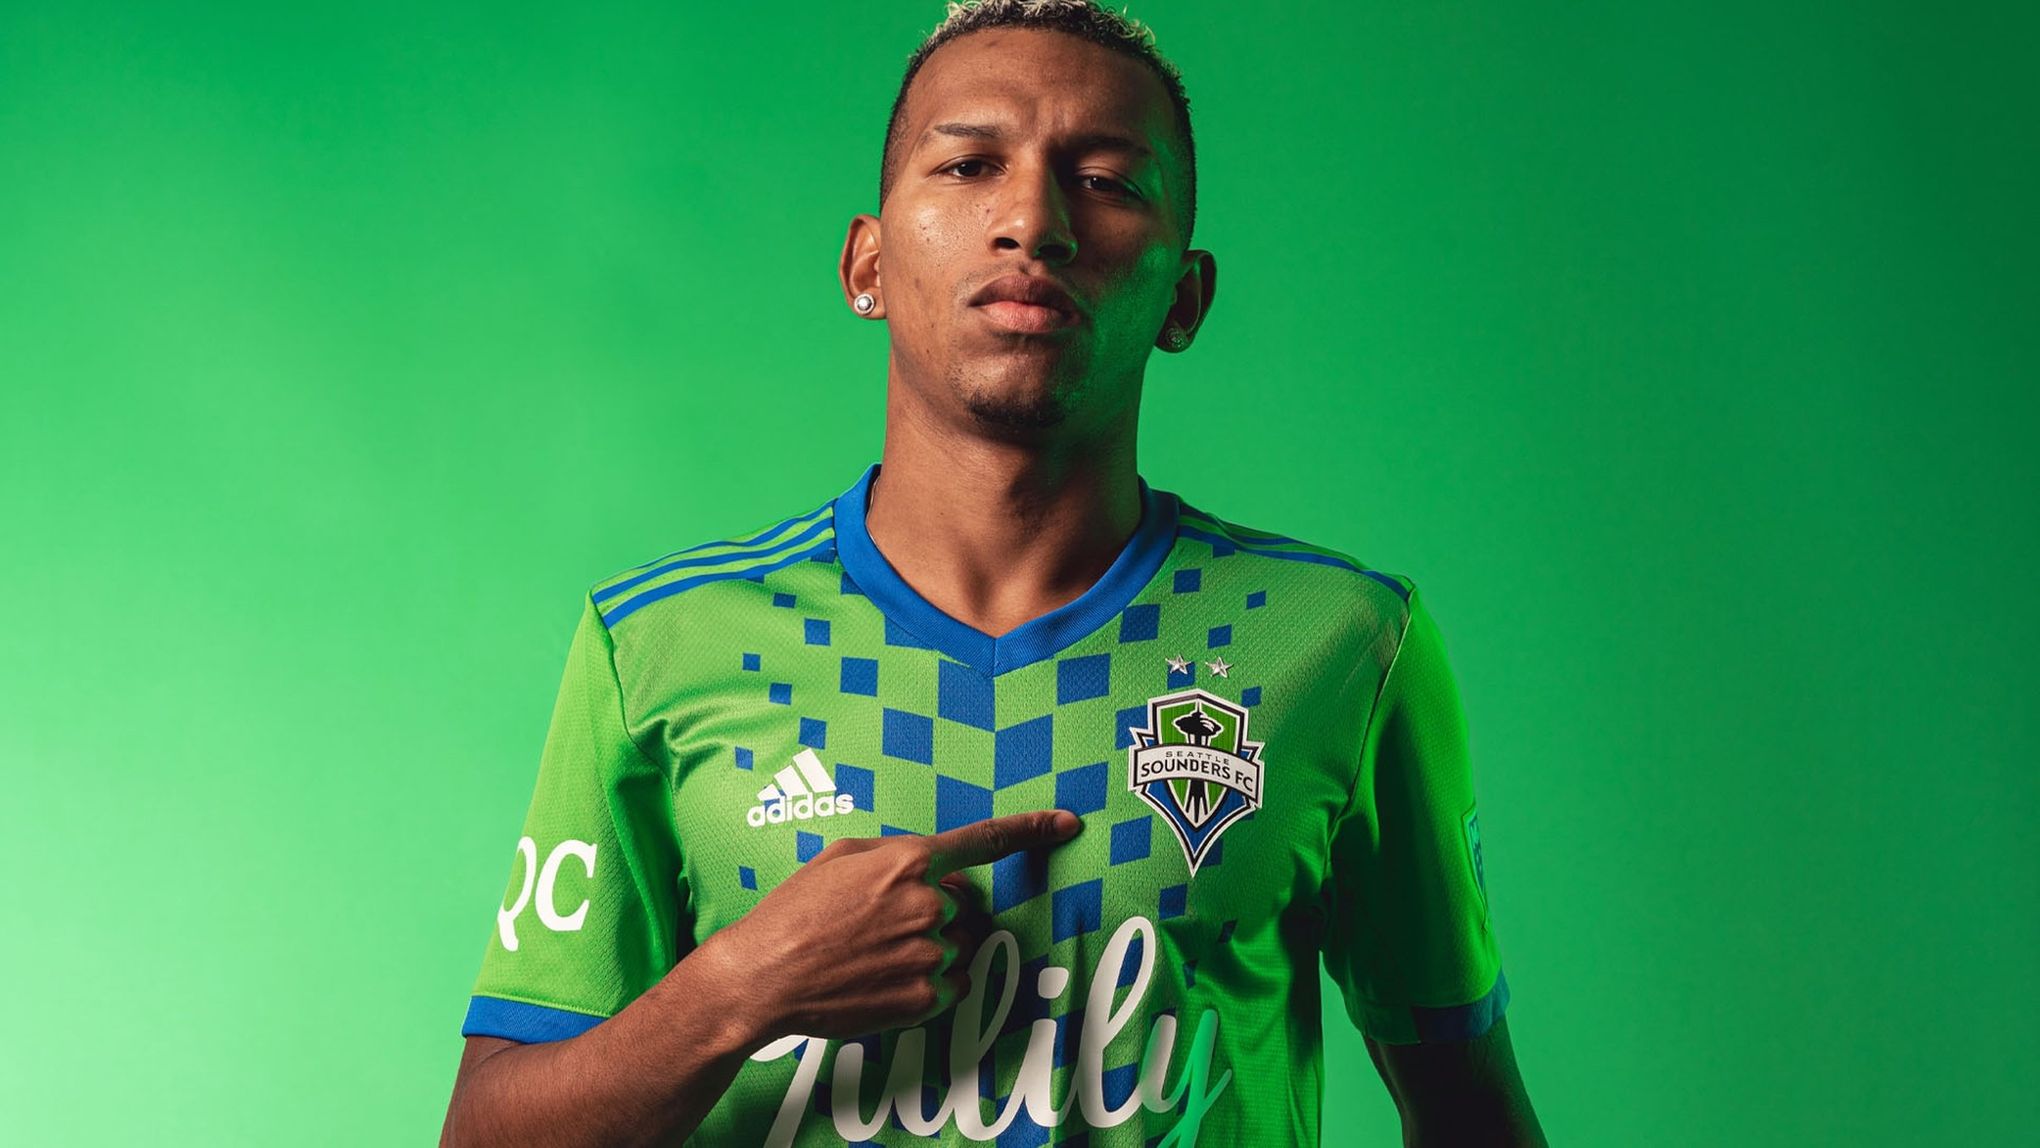 Seattle Sounders, Home Kit Concept on Behance